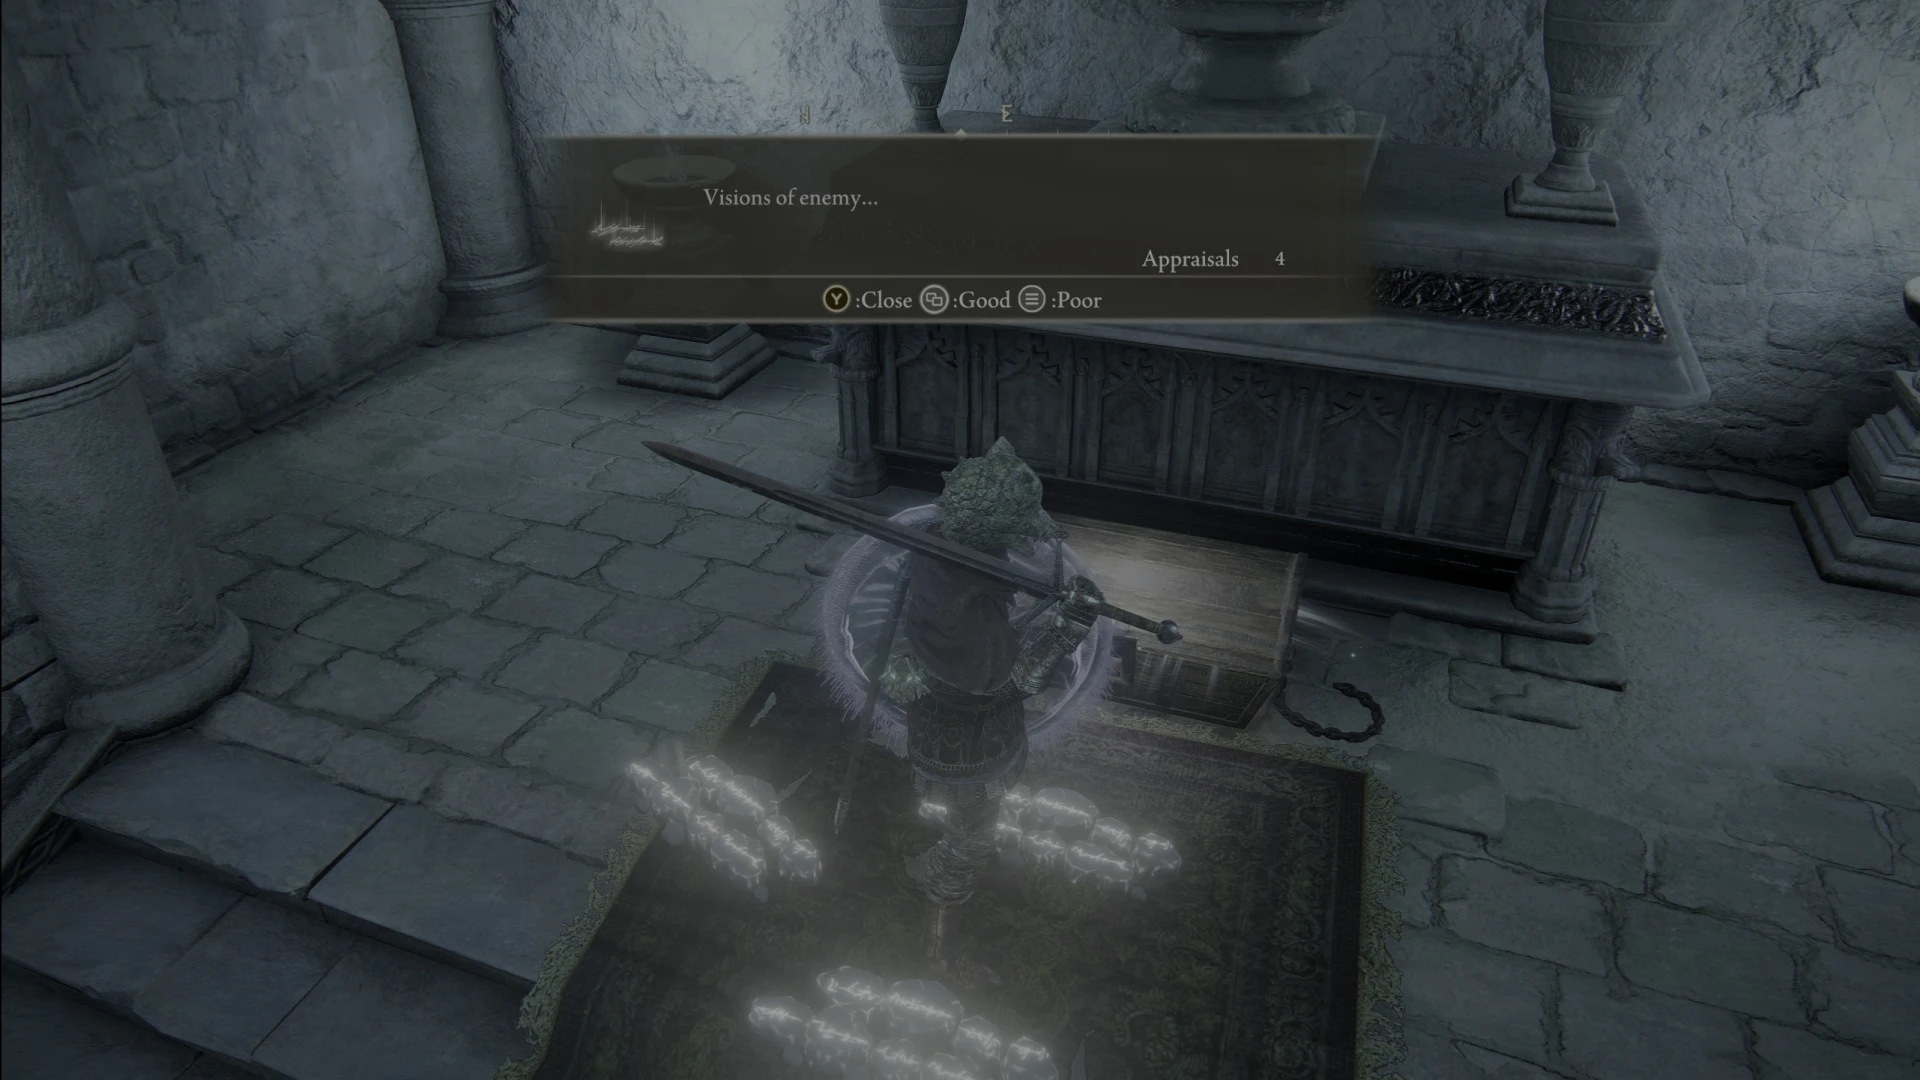 There are no mimic chests in Elden Ring&hellip; yet. But I laughed seeing this.